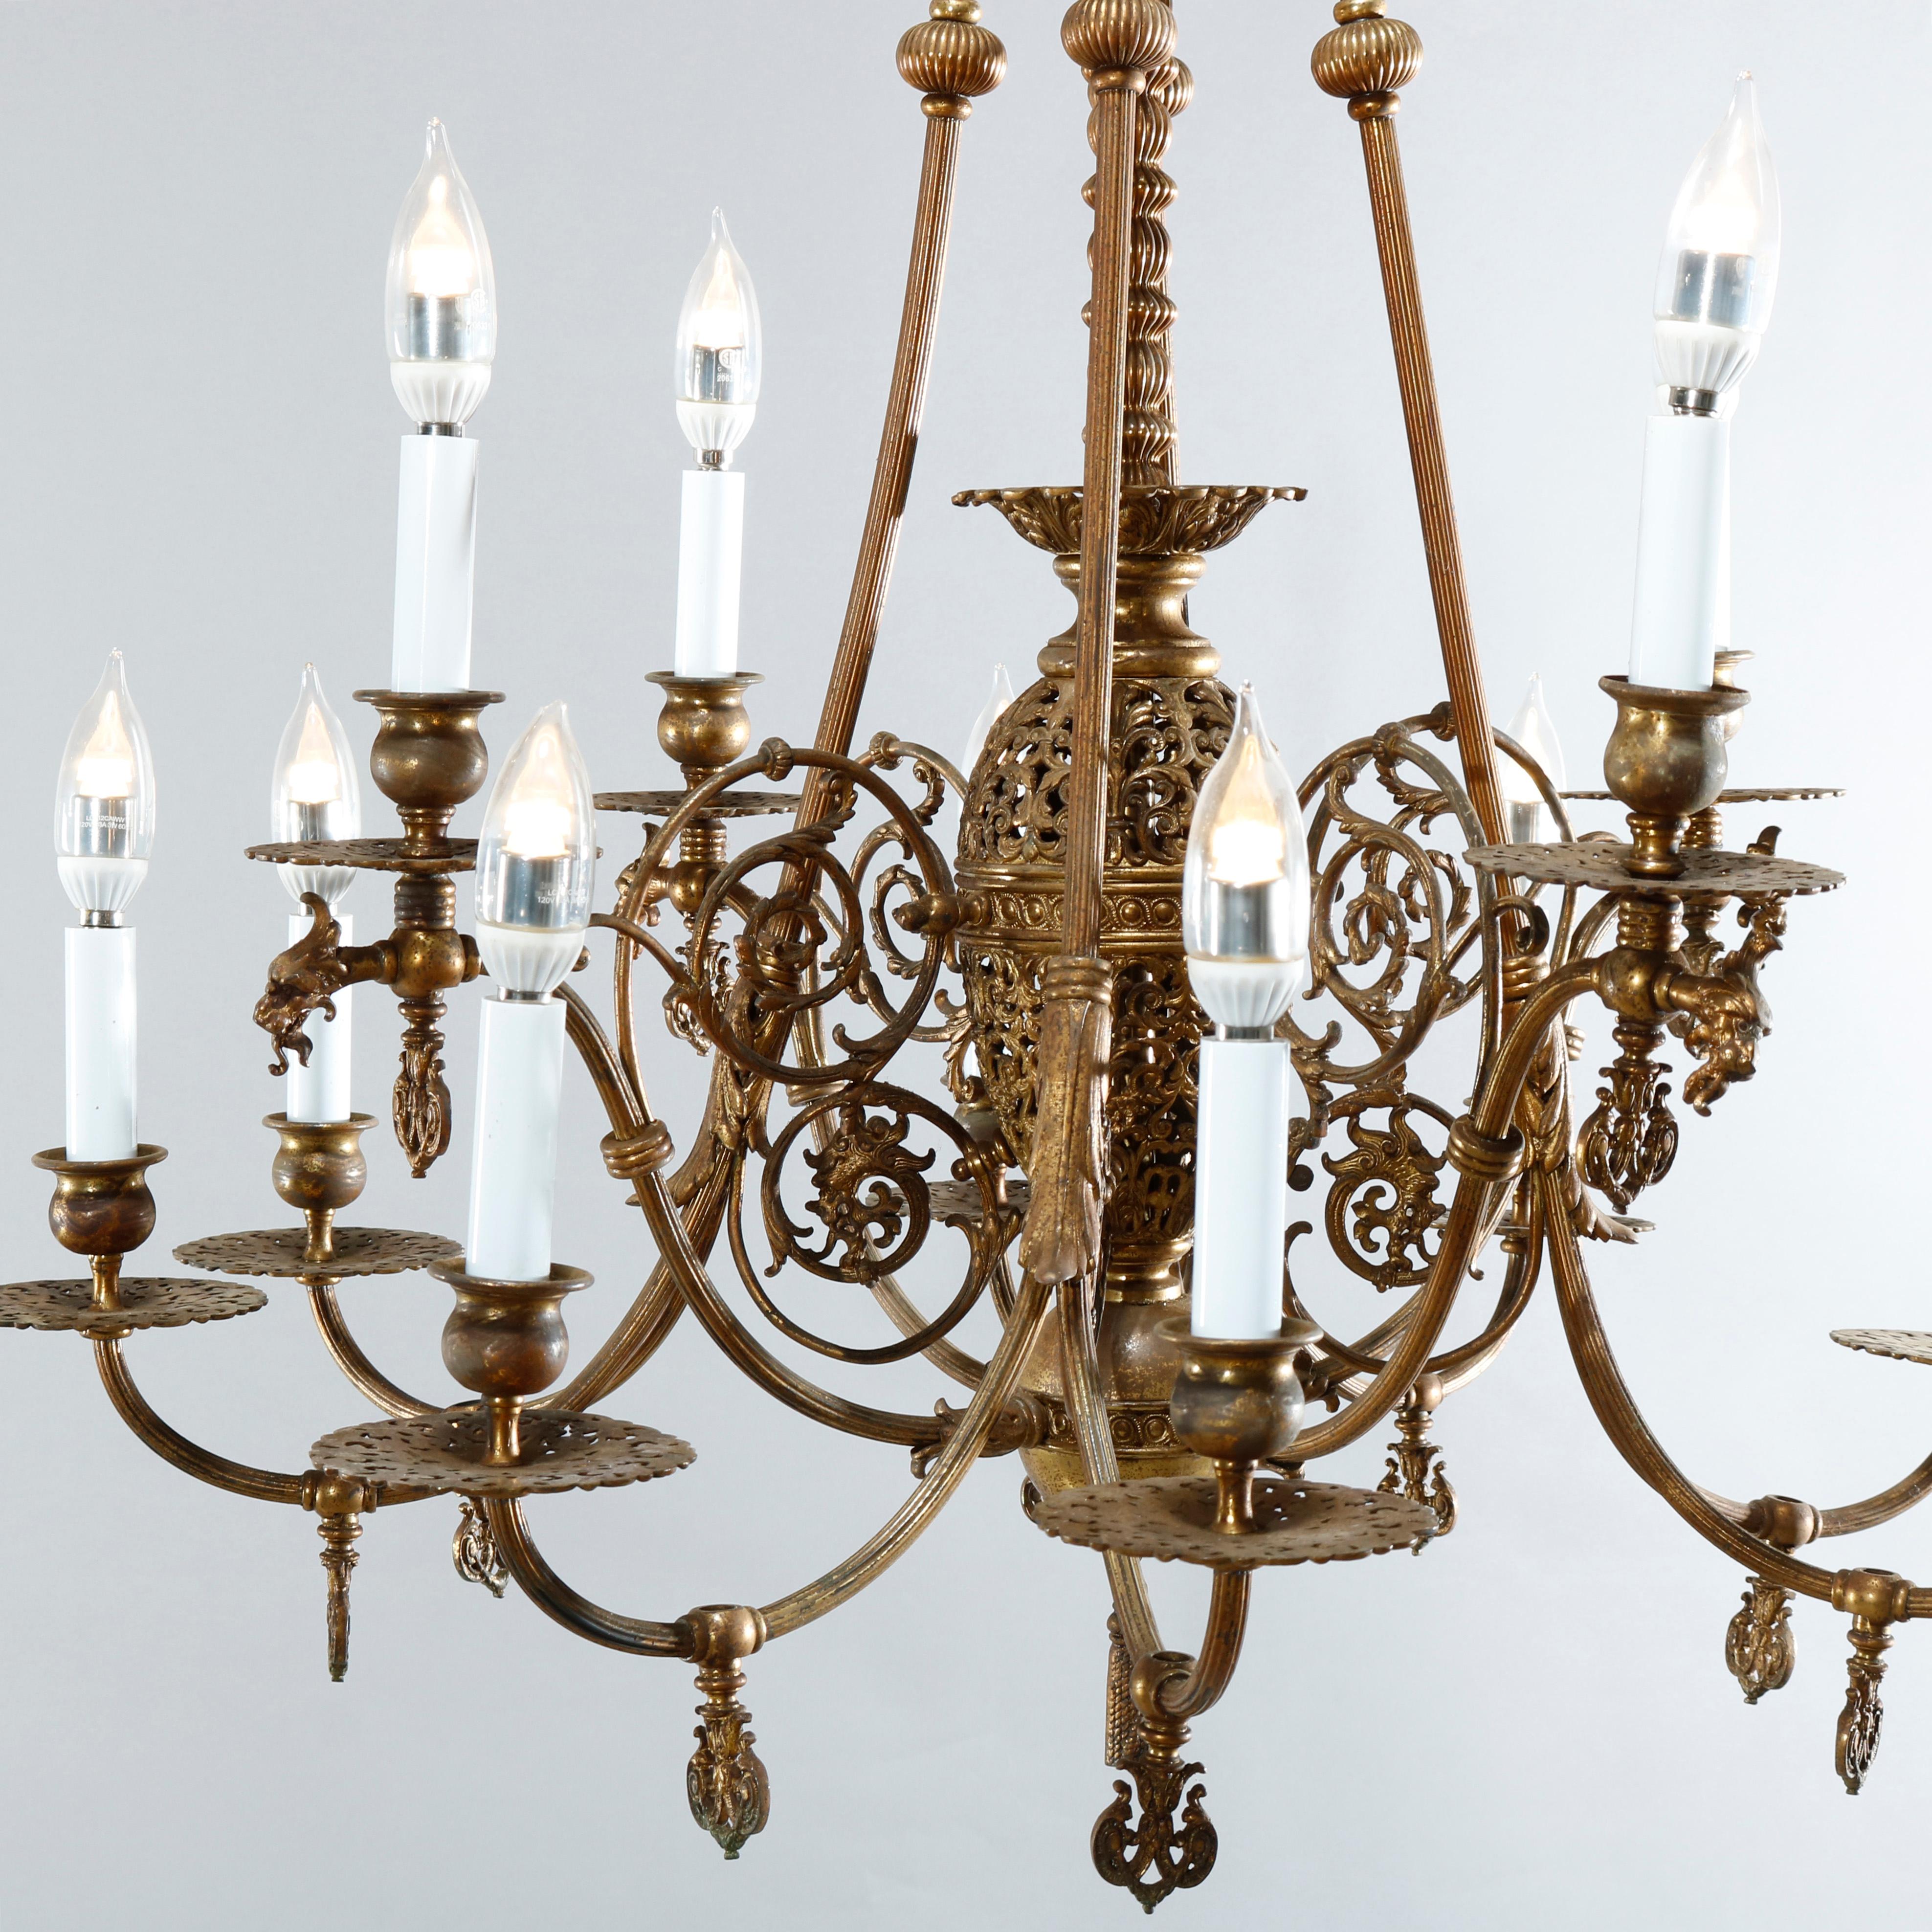 An early Victorian combination gas and electric chandelier offers brass and bronze construction with foliate filigree font having scroll and foliate form and reeded arms terminating in twelve candle lights, drop pendant and acanthus elements